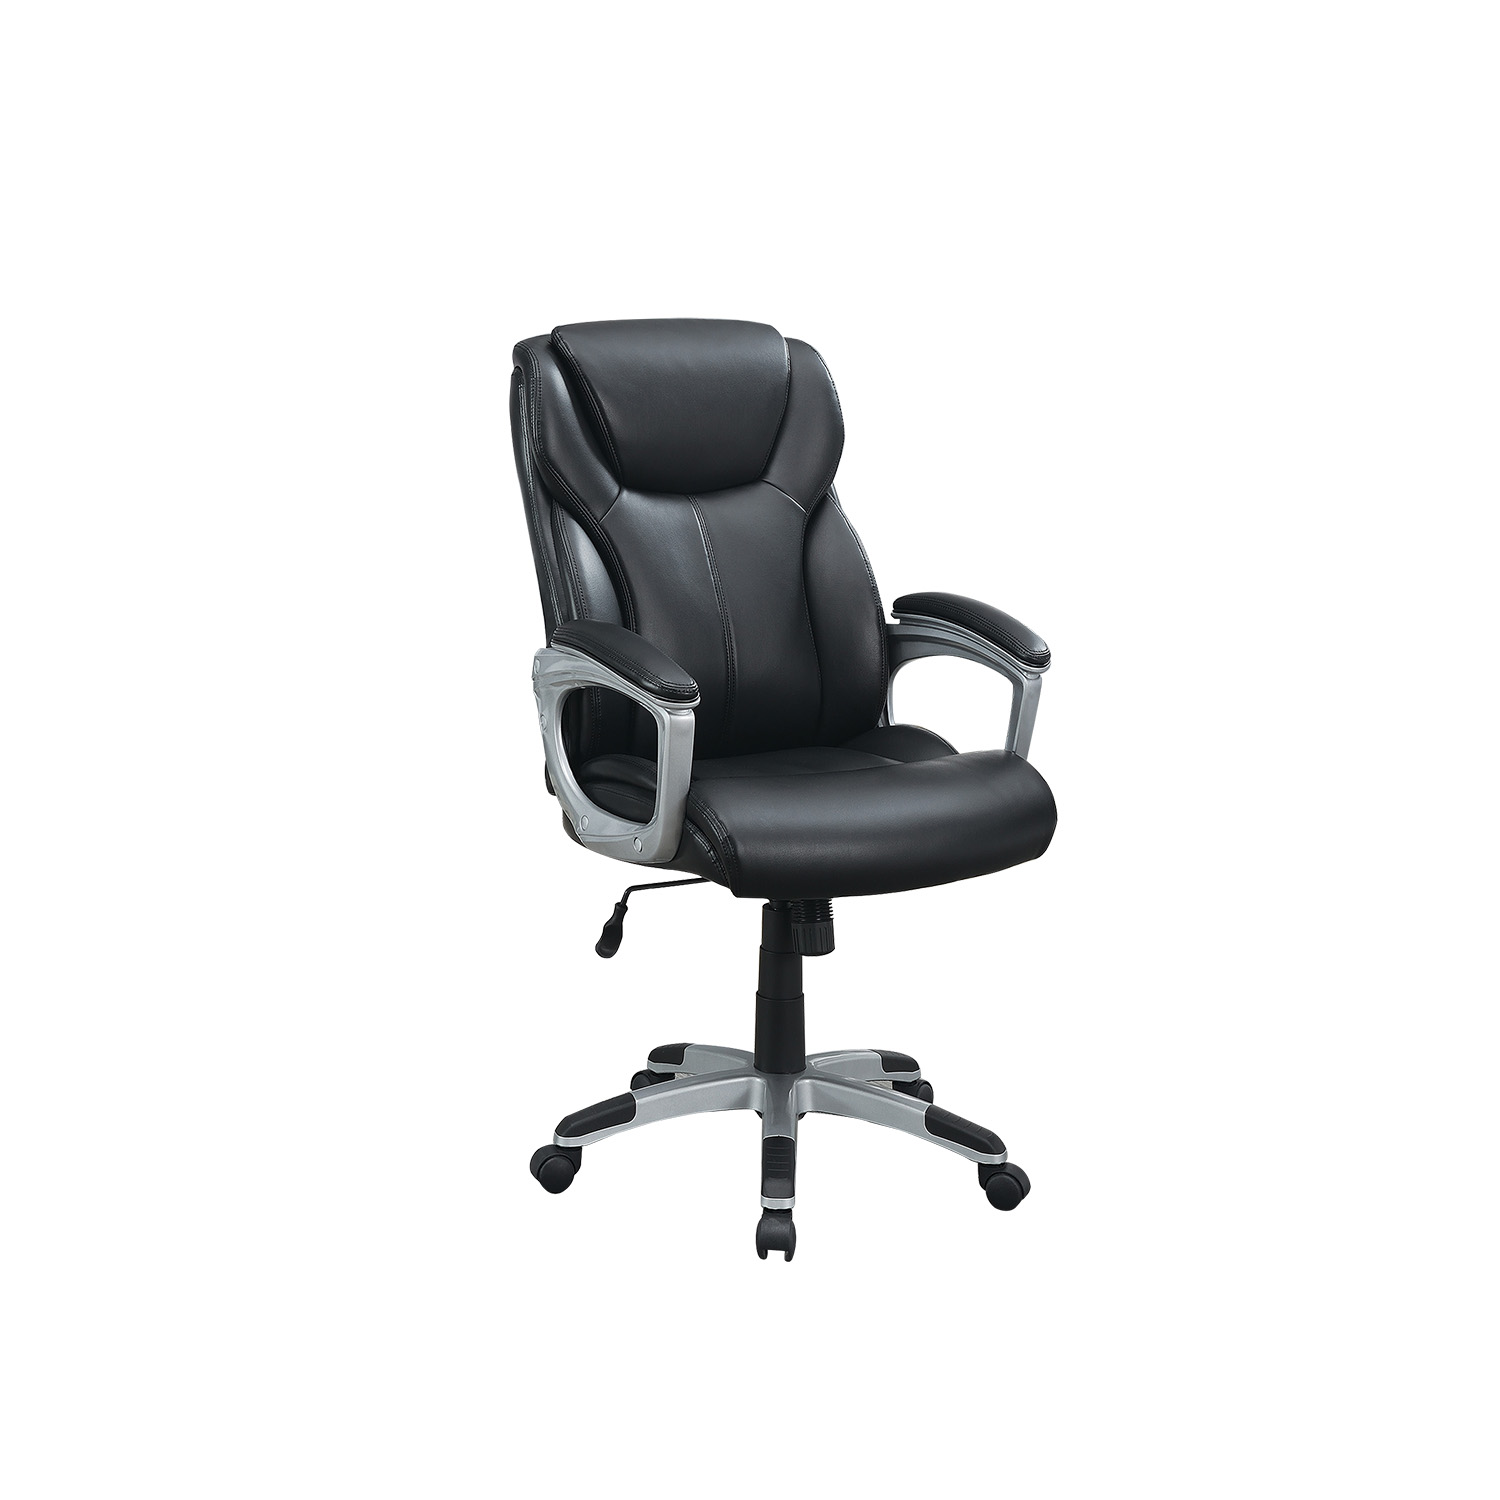 Adjustable Height Office Chair with PU Leather, Black-CASAINC